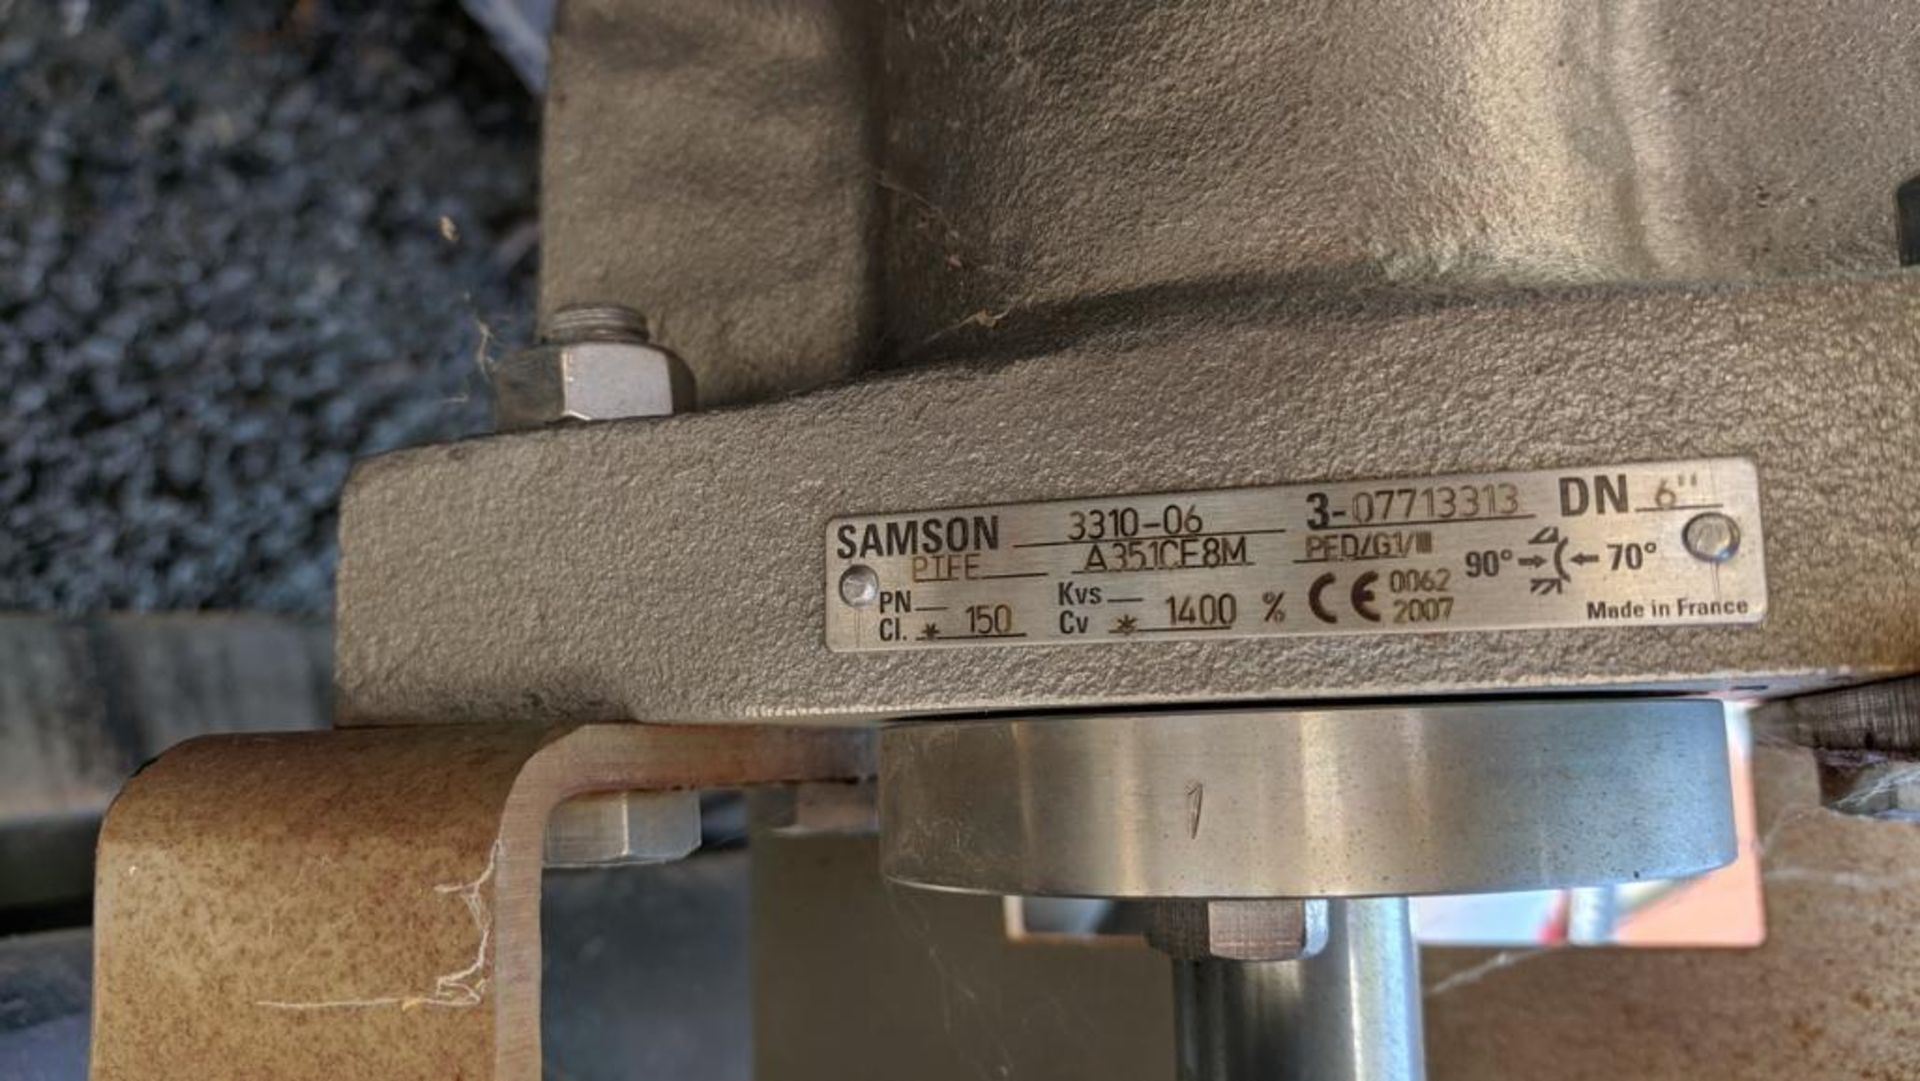 Samson 3310-06 stainless steel 6 in. segmented air operated b valve, v-b - Image 12 of 20